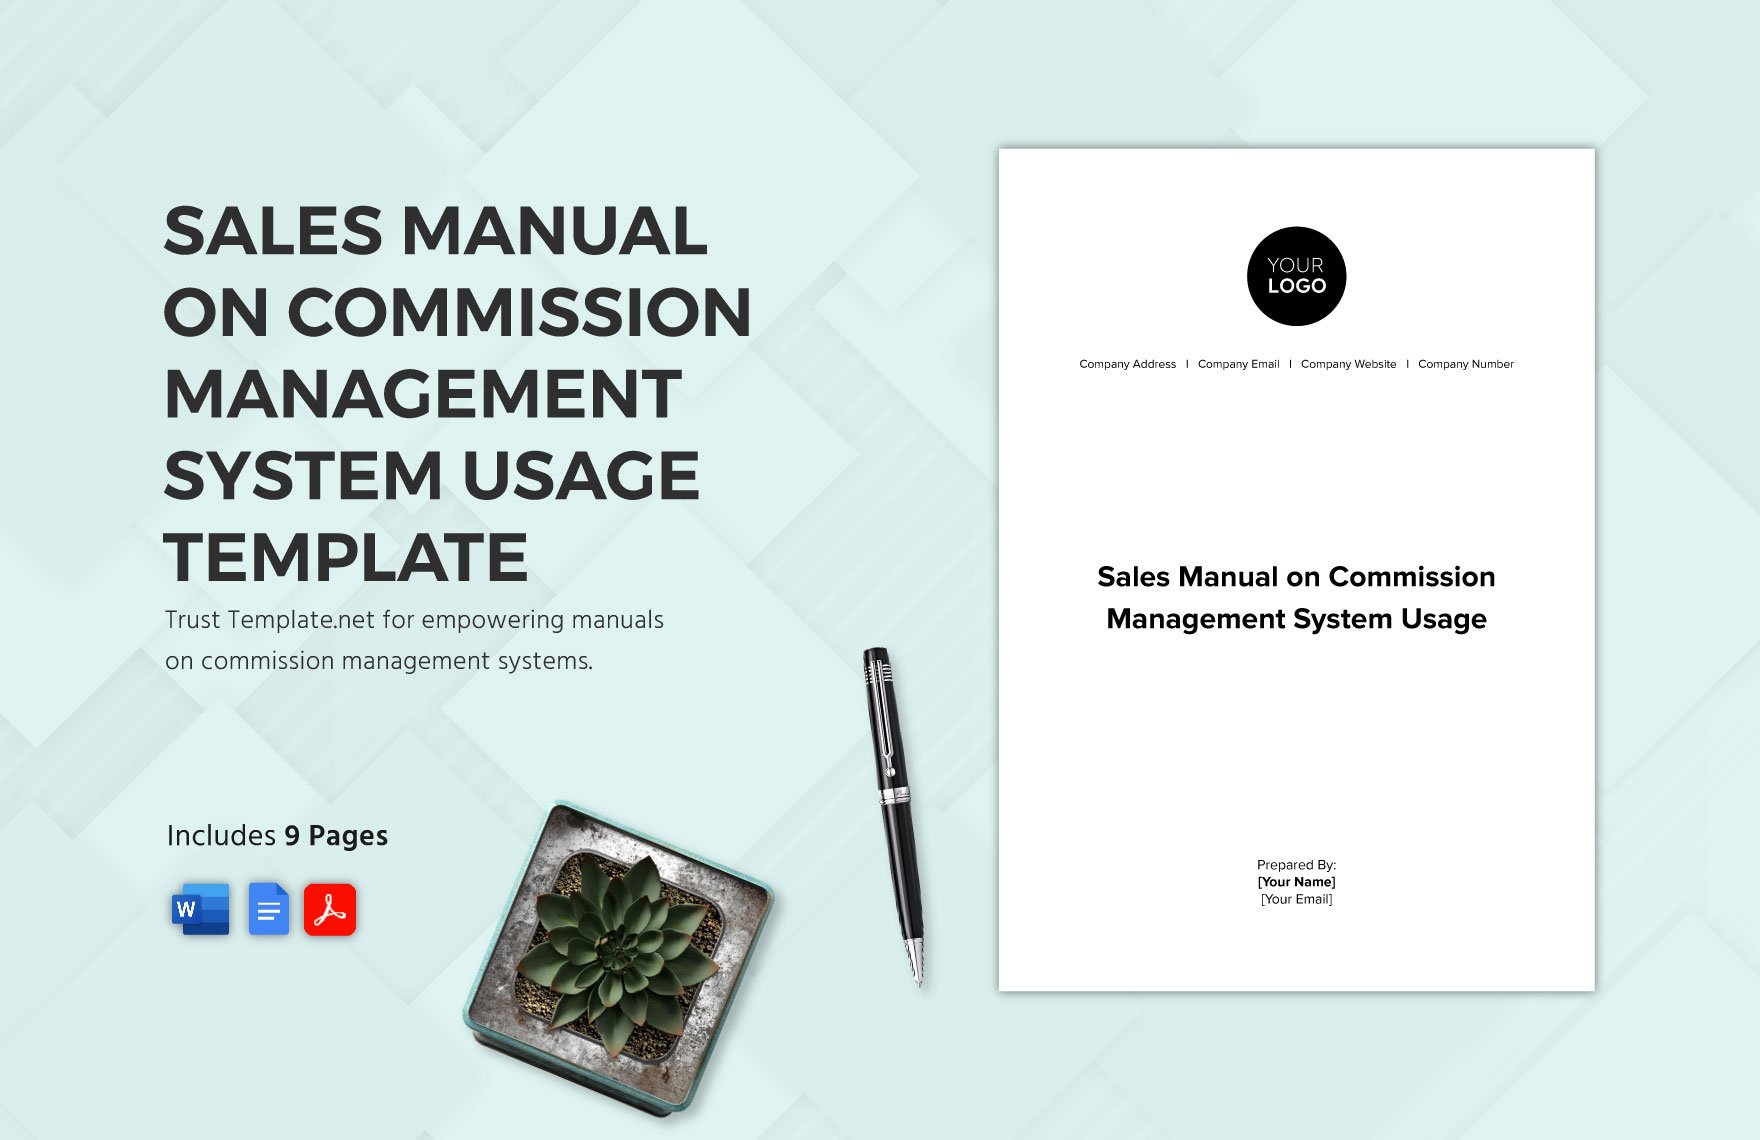 Sales Manual on Commission Management System Usage Template